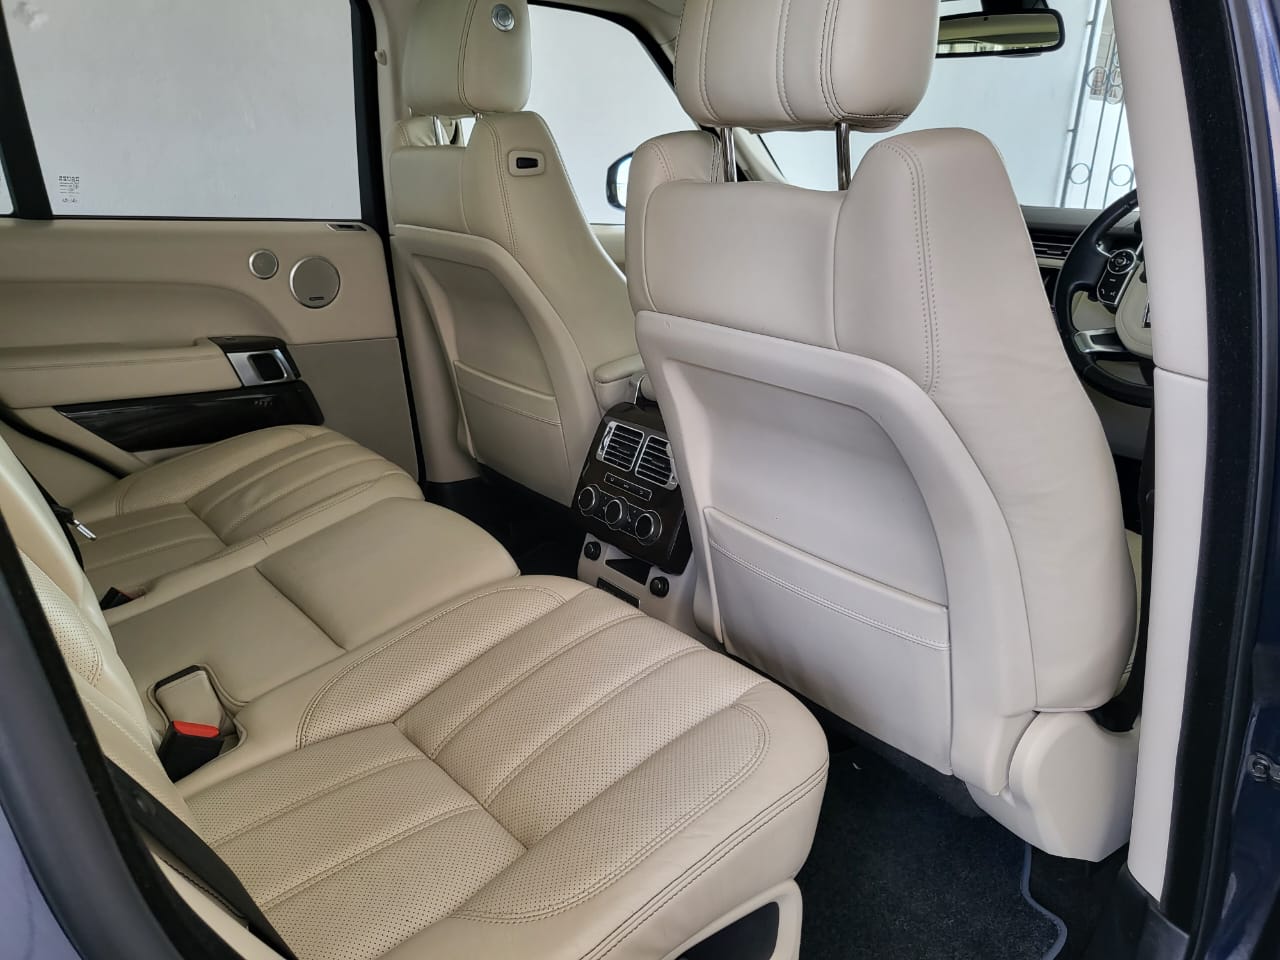 RANGE ROVER VOGUE 2015 Fully Loaded New on OFFER